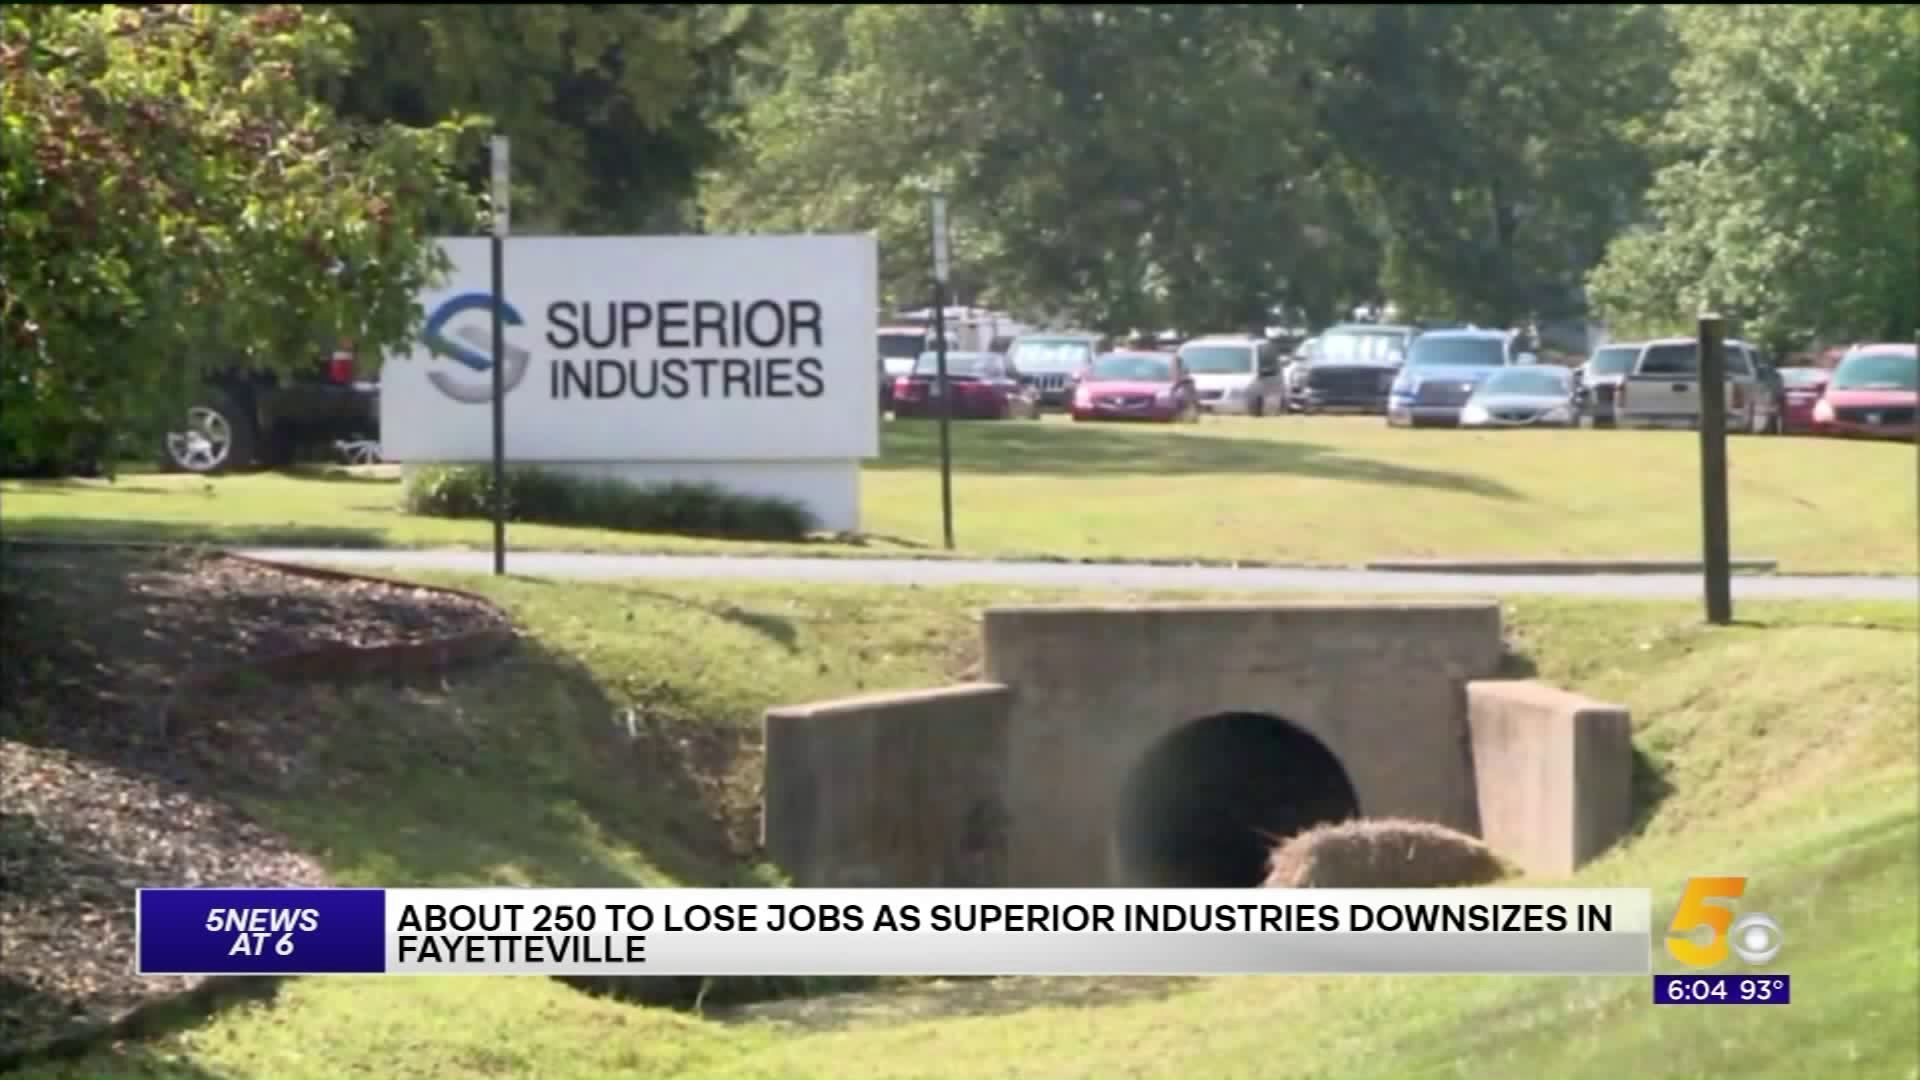 Superior Industries Downsizing Fayetteville Operation; At Least 250 To Lose Jobs